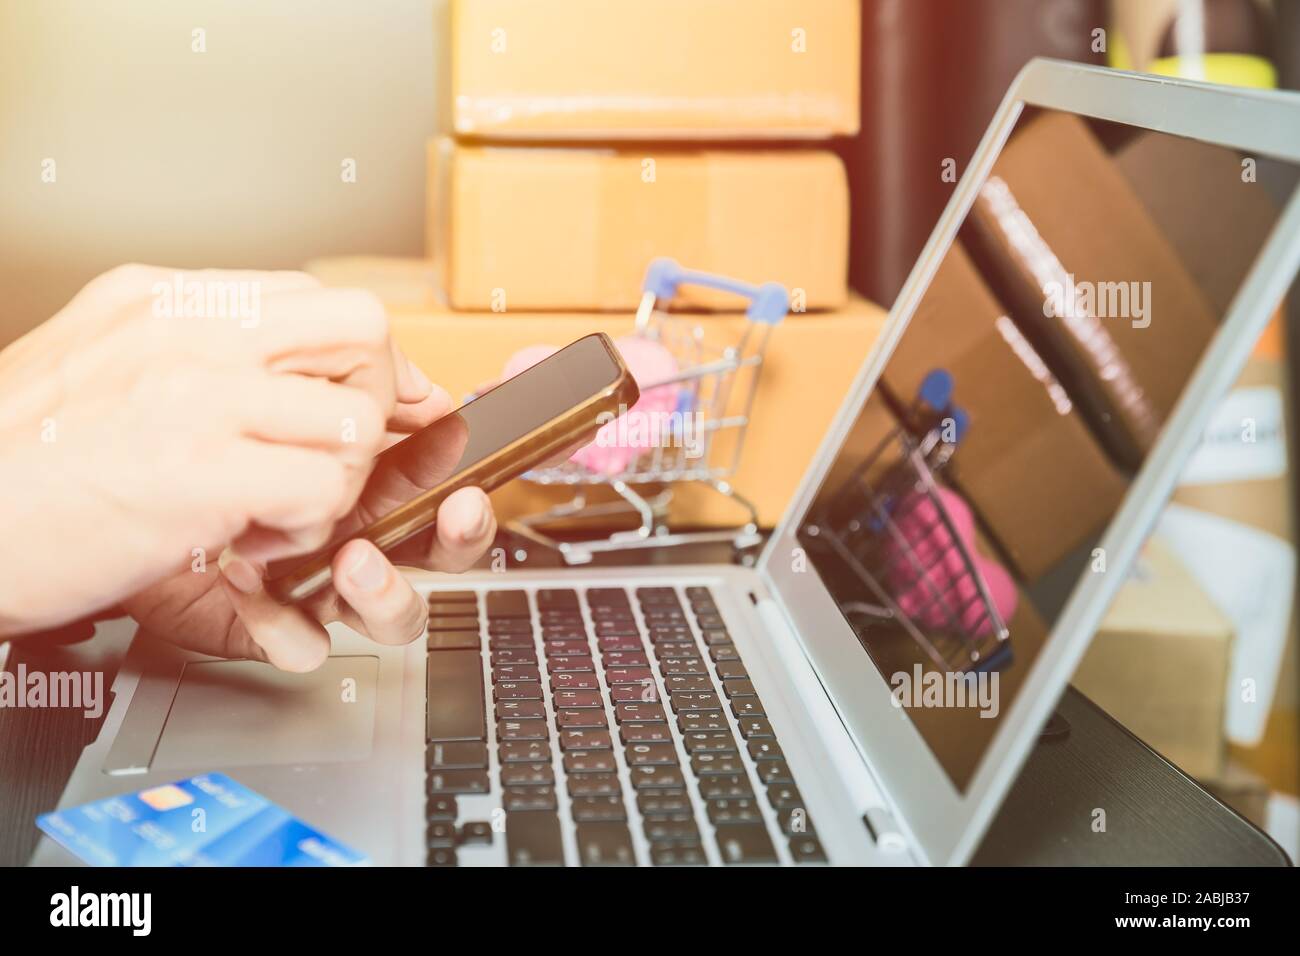 hand checking order at smartphone for online shopping technology from laptop to smart apps. Stock Photo